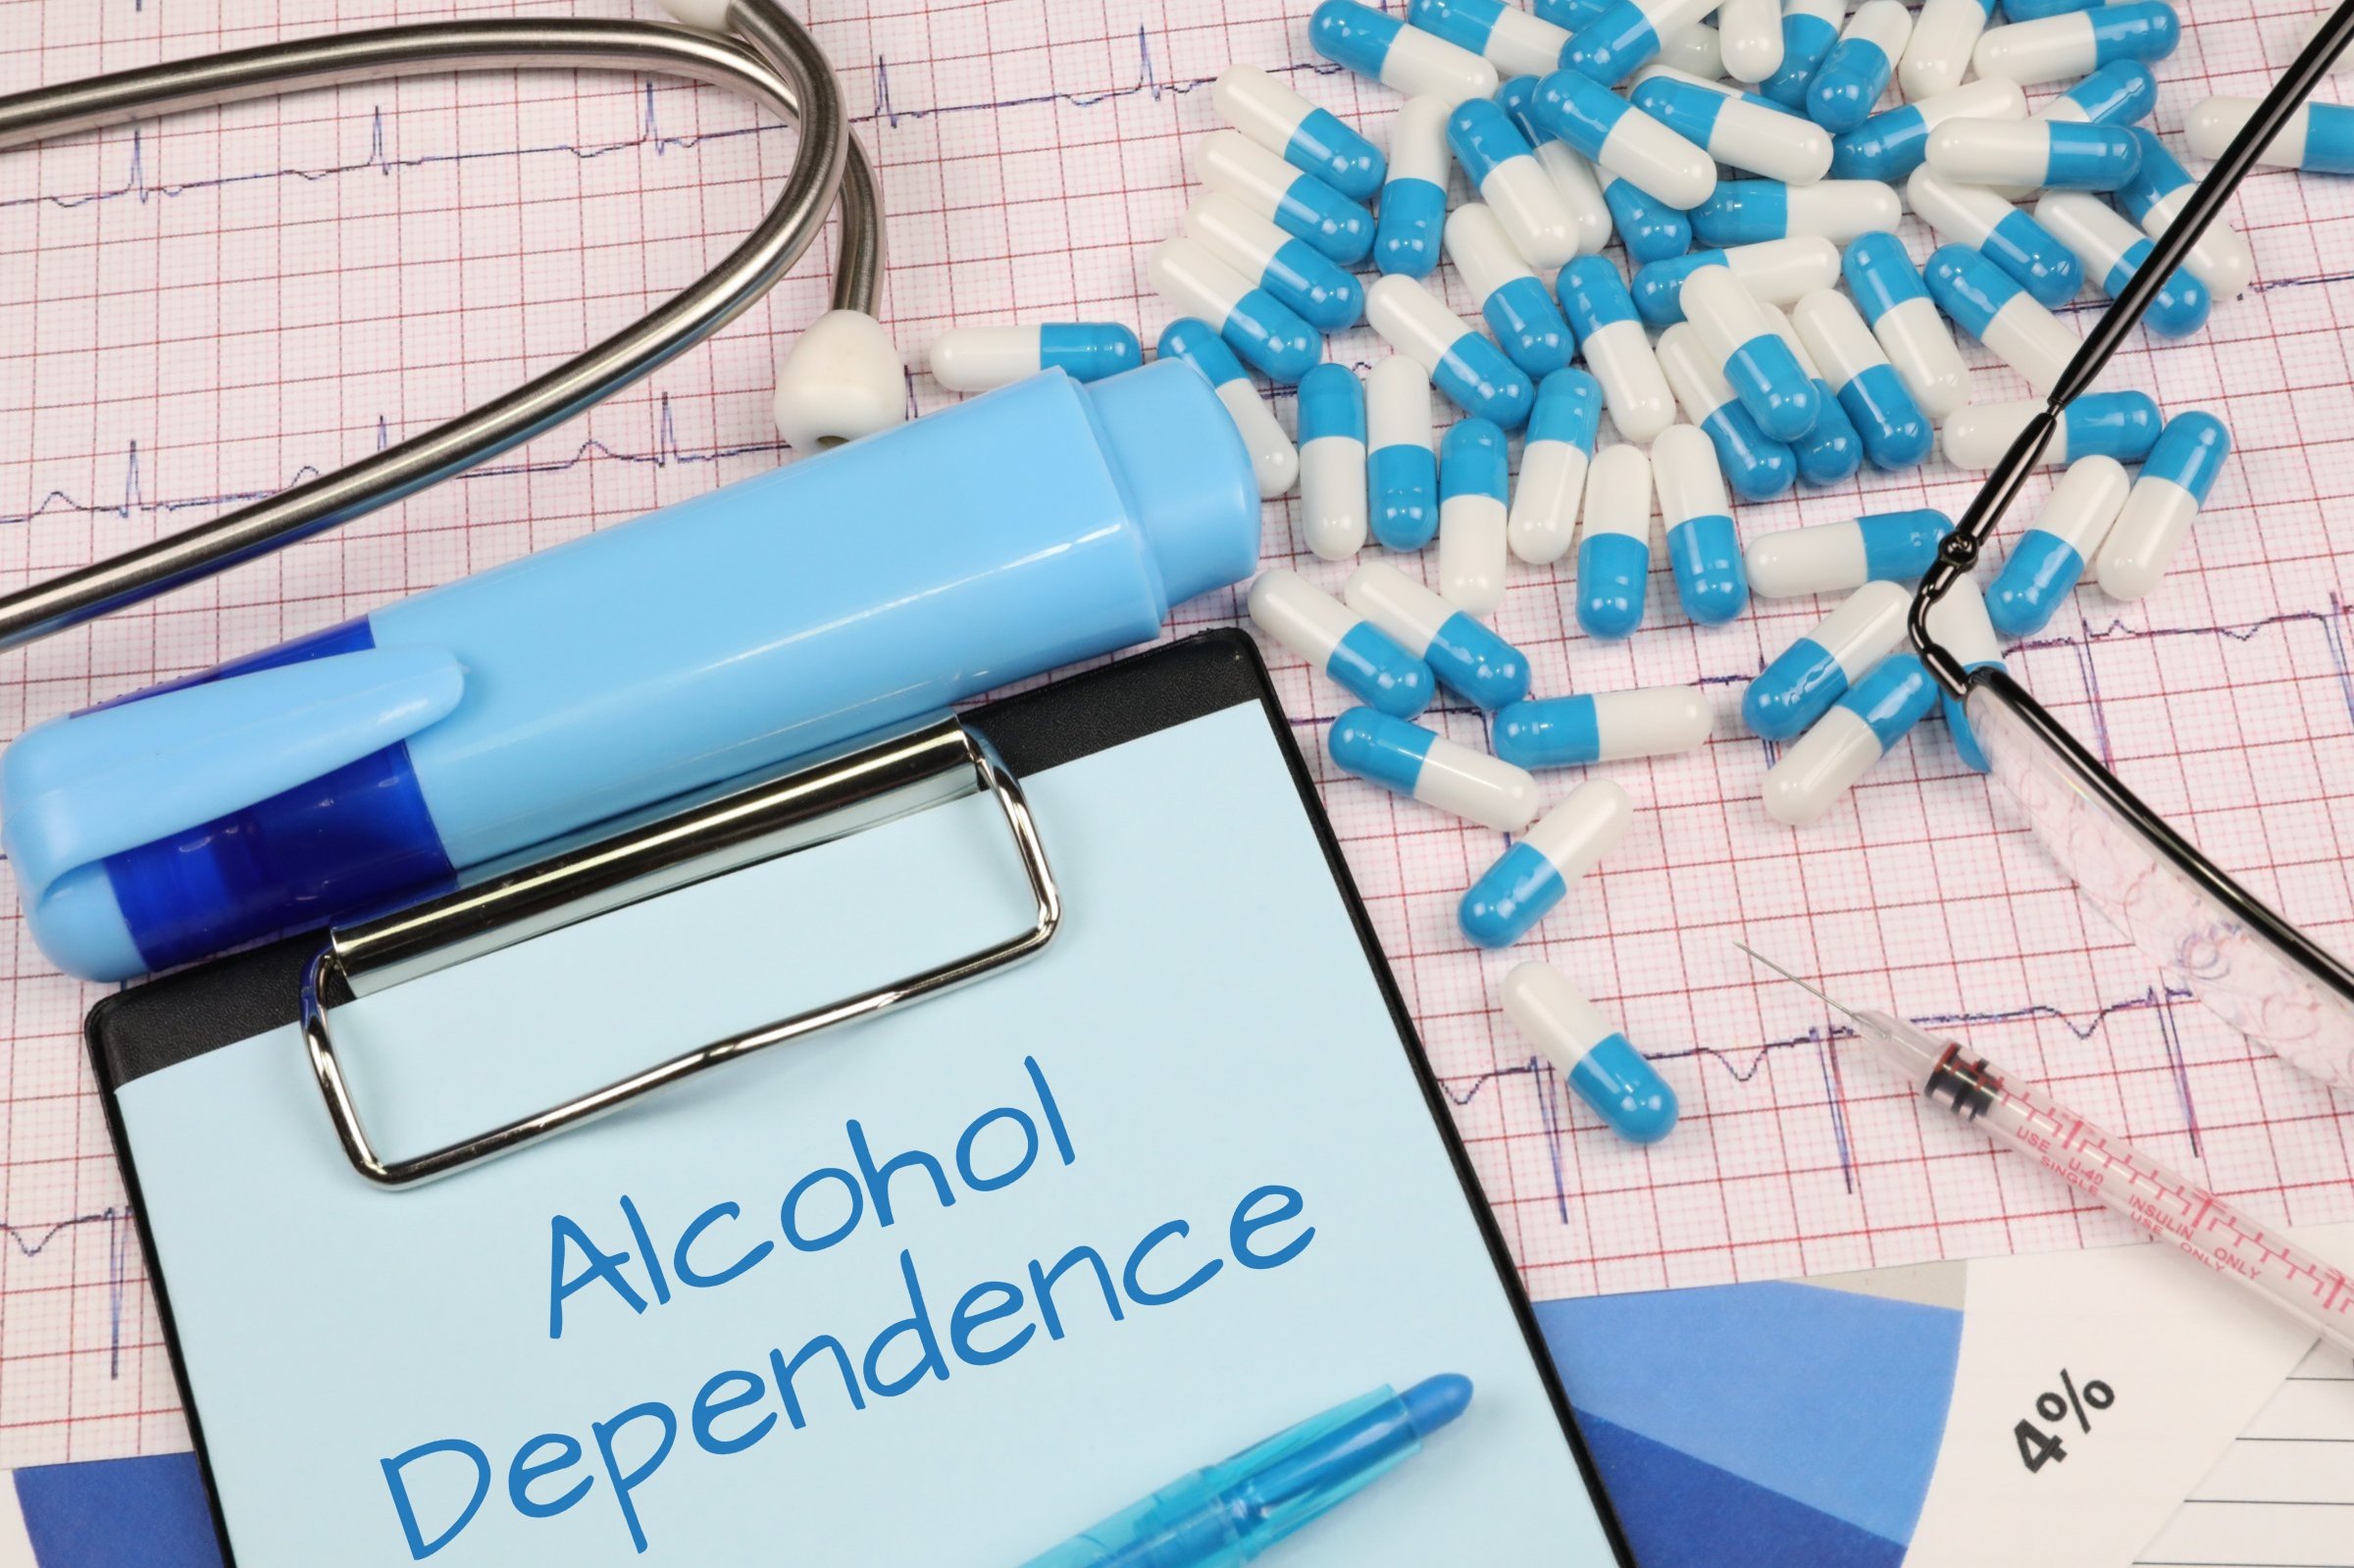 alcohol dependence